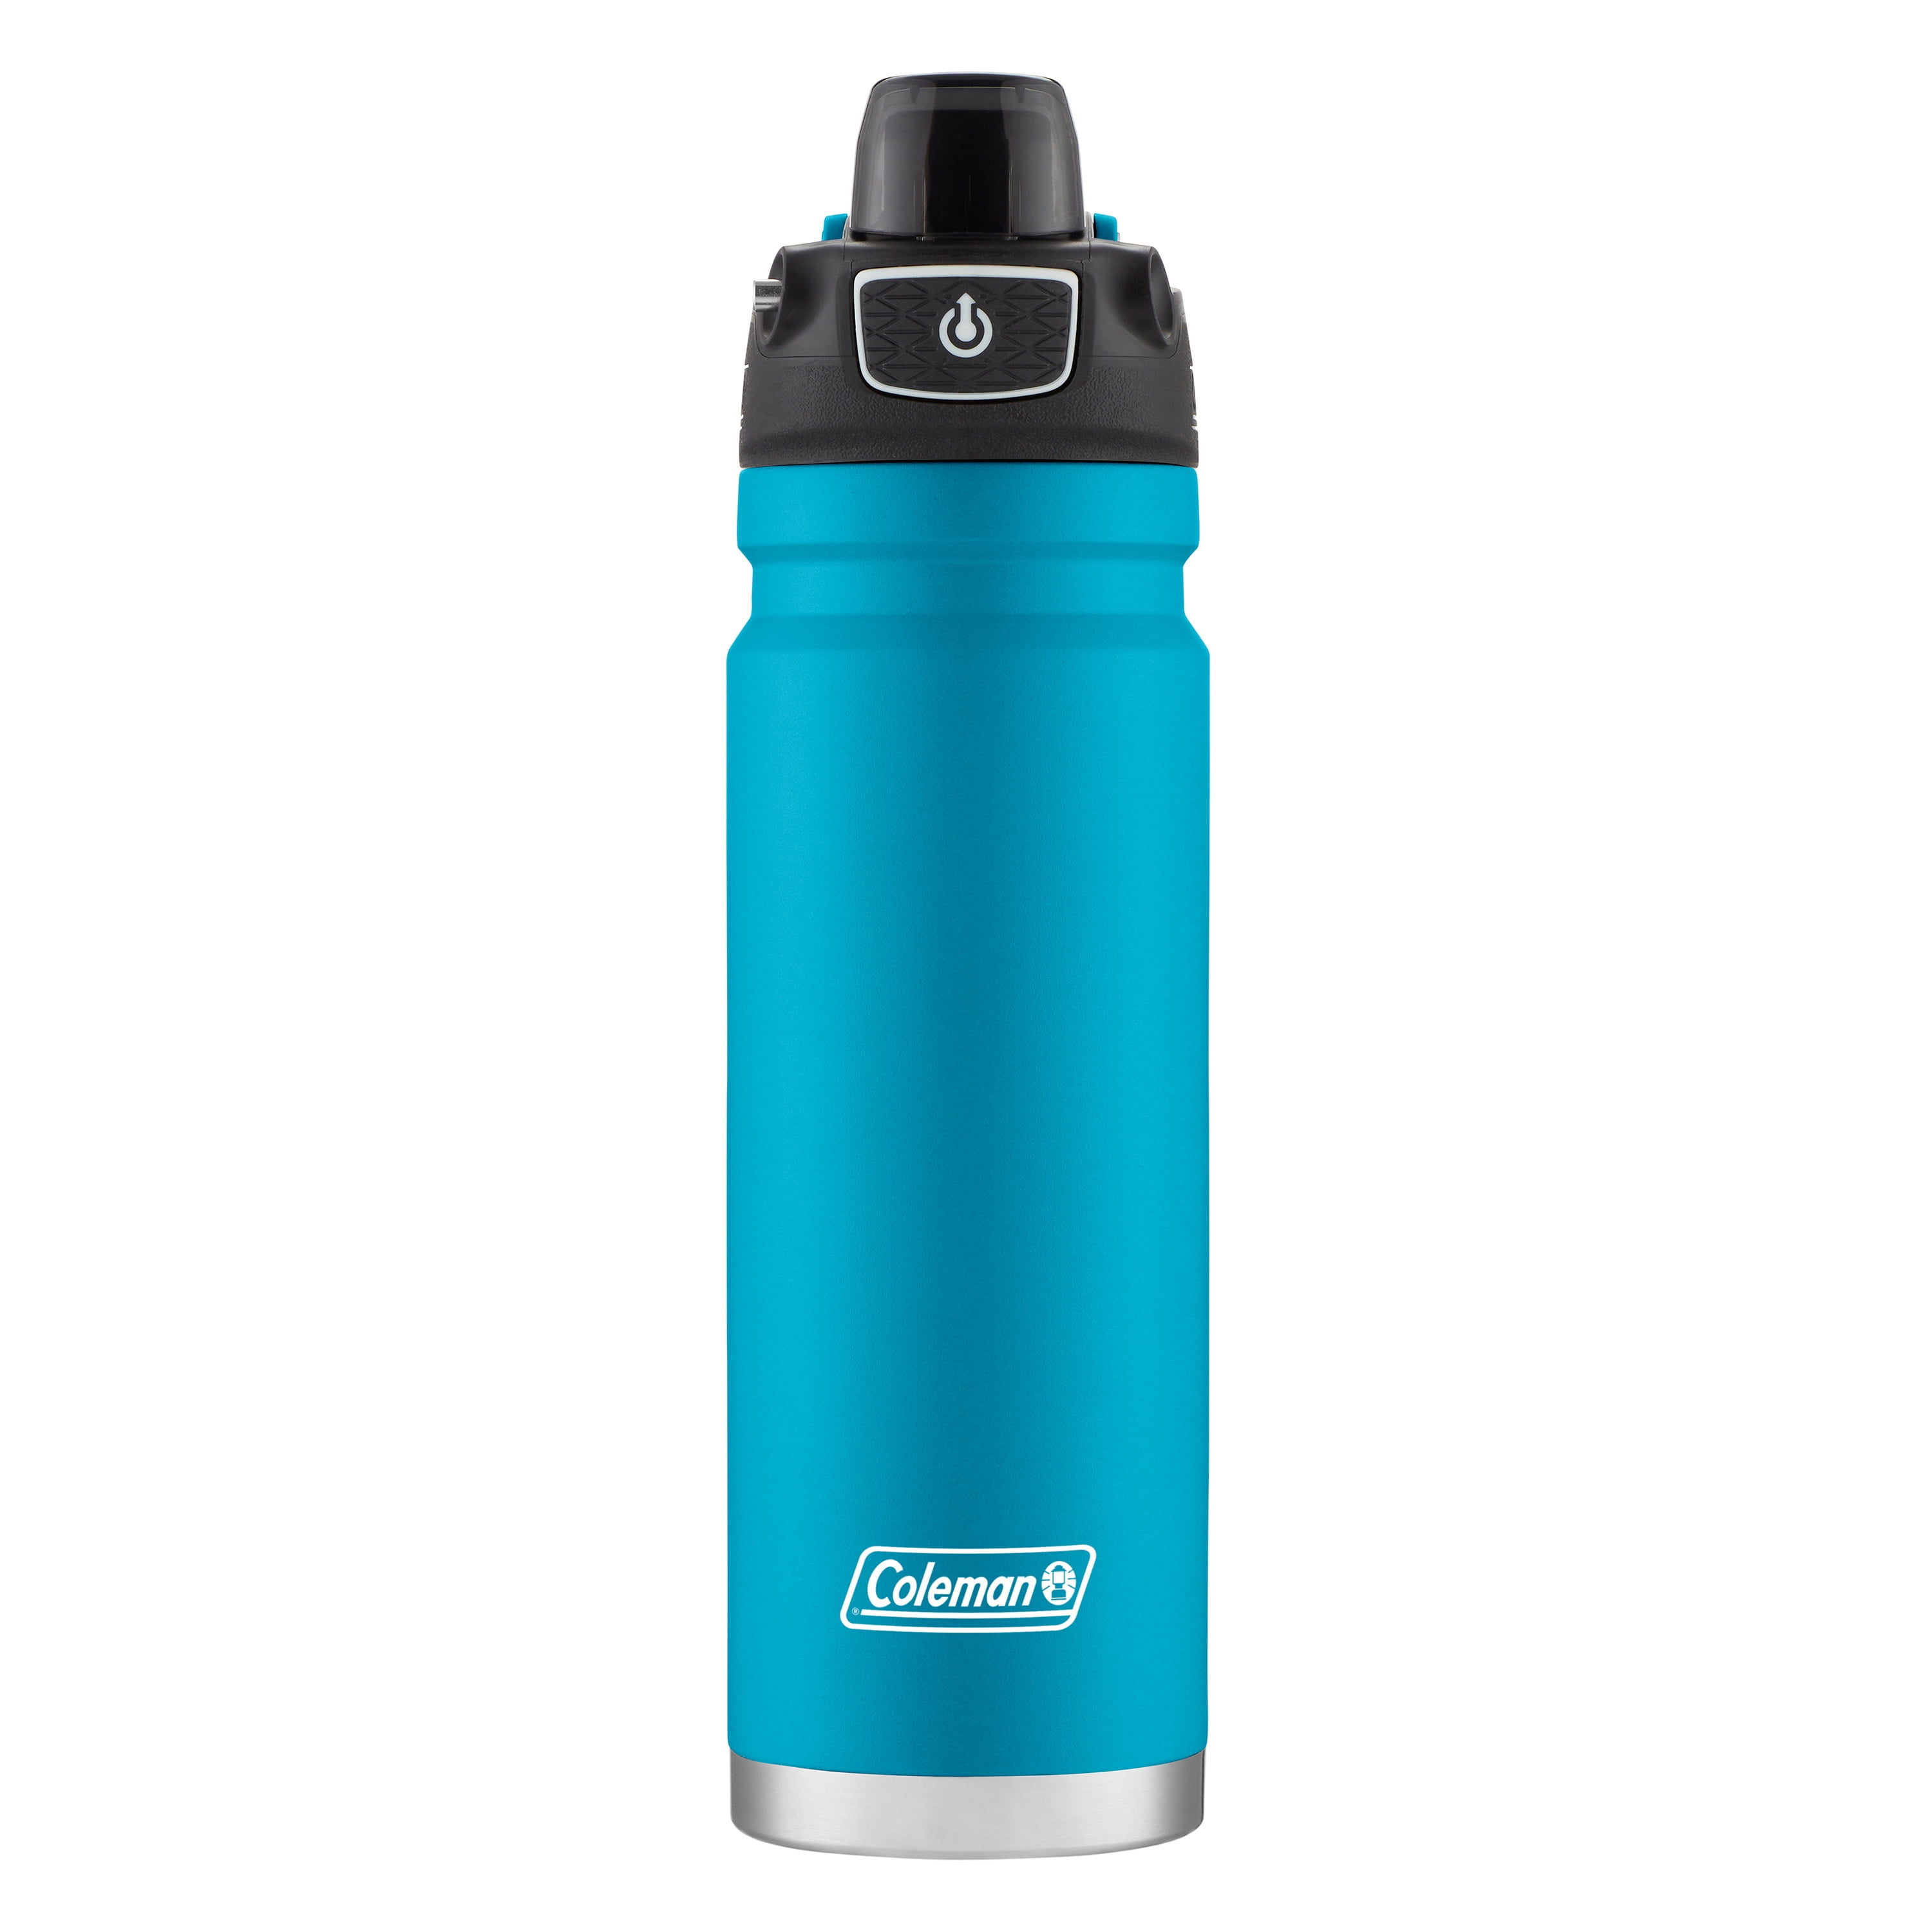 Thermosis 64 oz Water Bottle with Straw, Half Gallon Water Bottle Thermos, Insulated Water Bottle, Stainless Steel Water Bottles. Sports Water